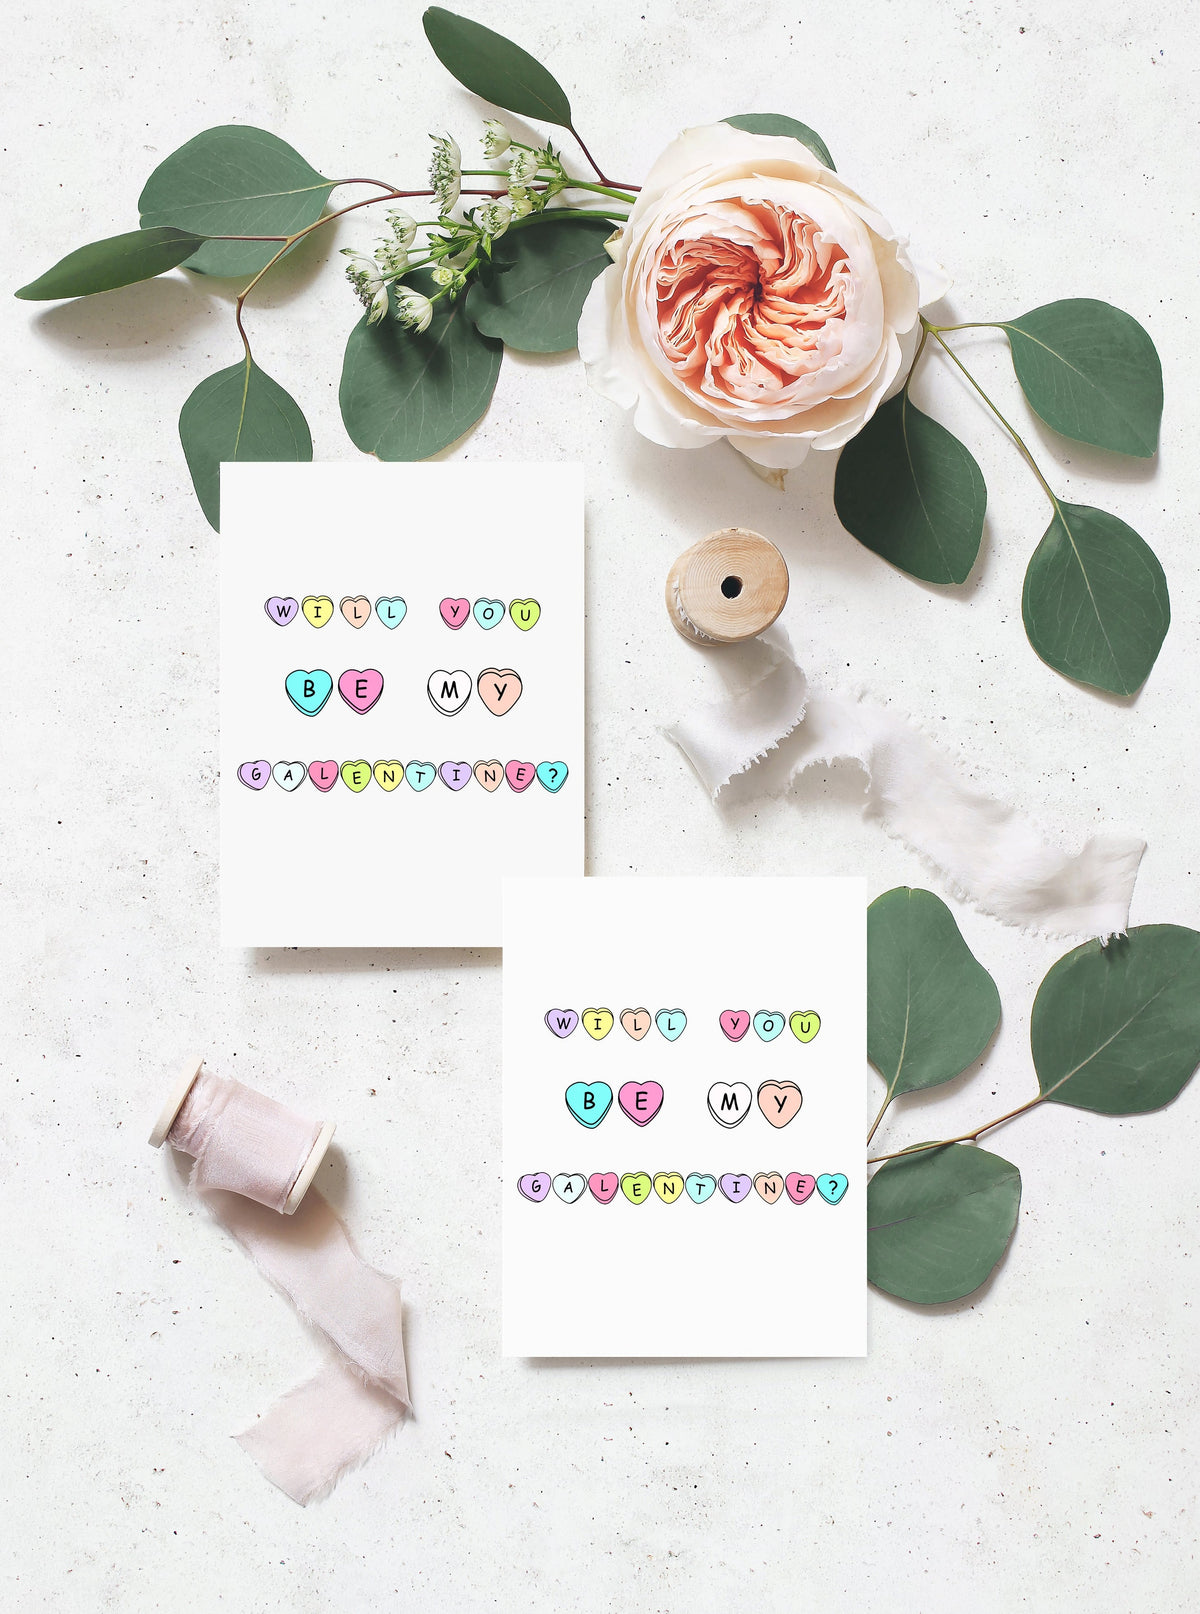 will you be my galentine? written out in colorful heart candy on white greeting card